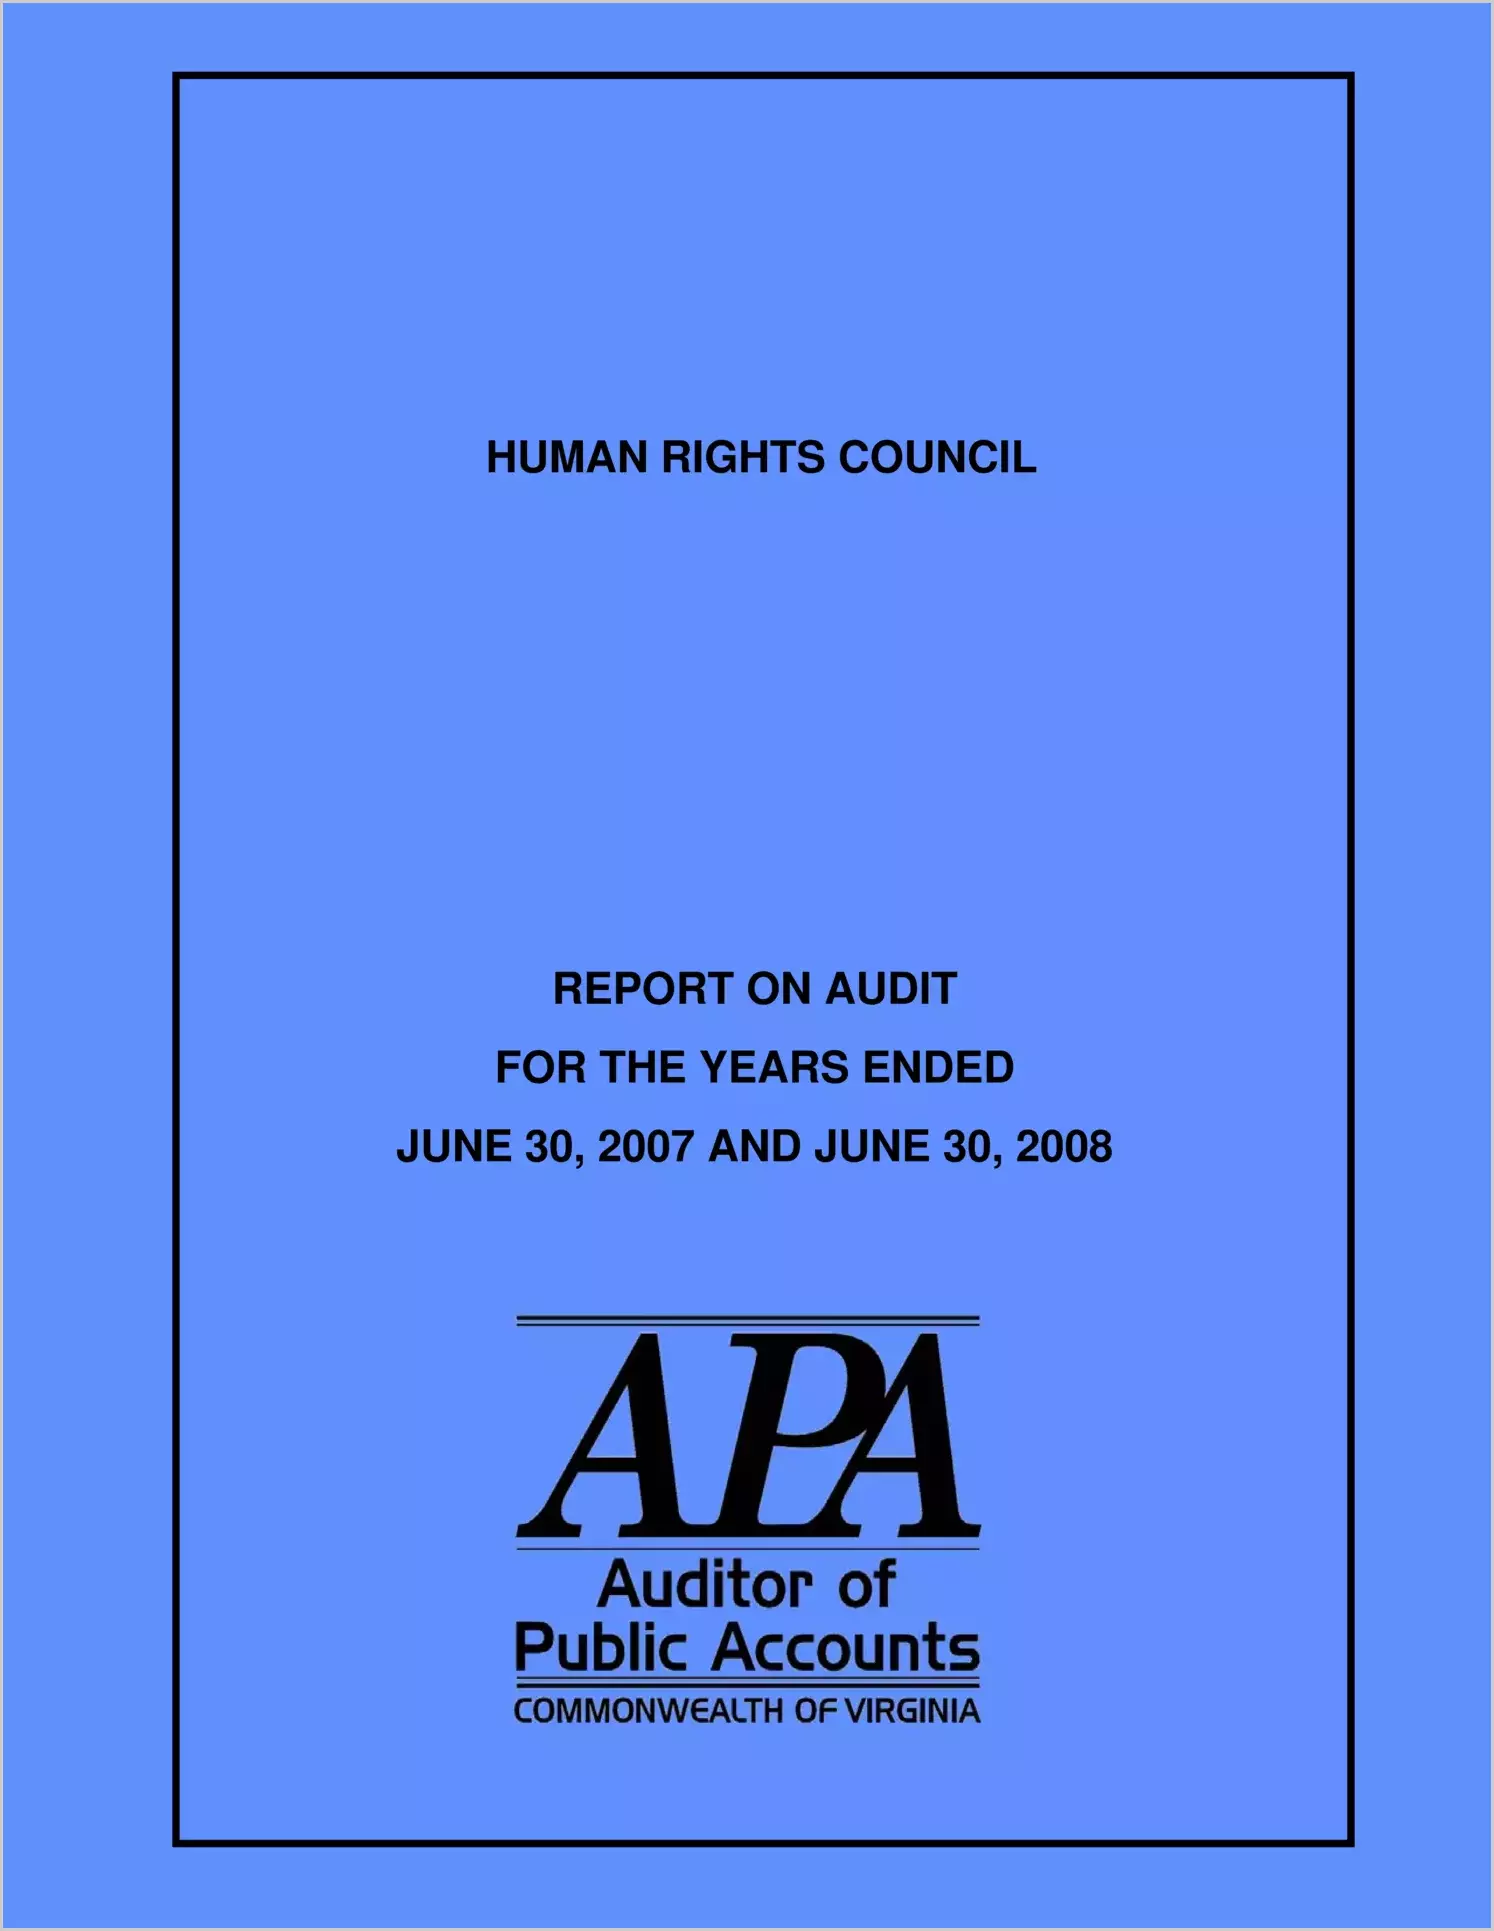 Human Rights Council for the years ended June 30, 2007 and June 30, 2008